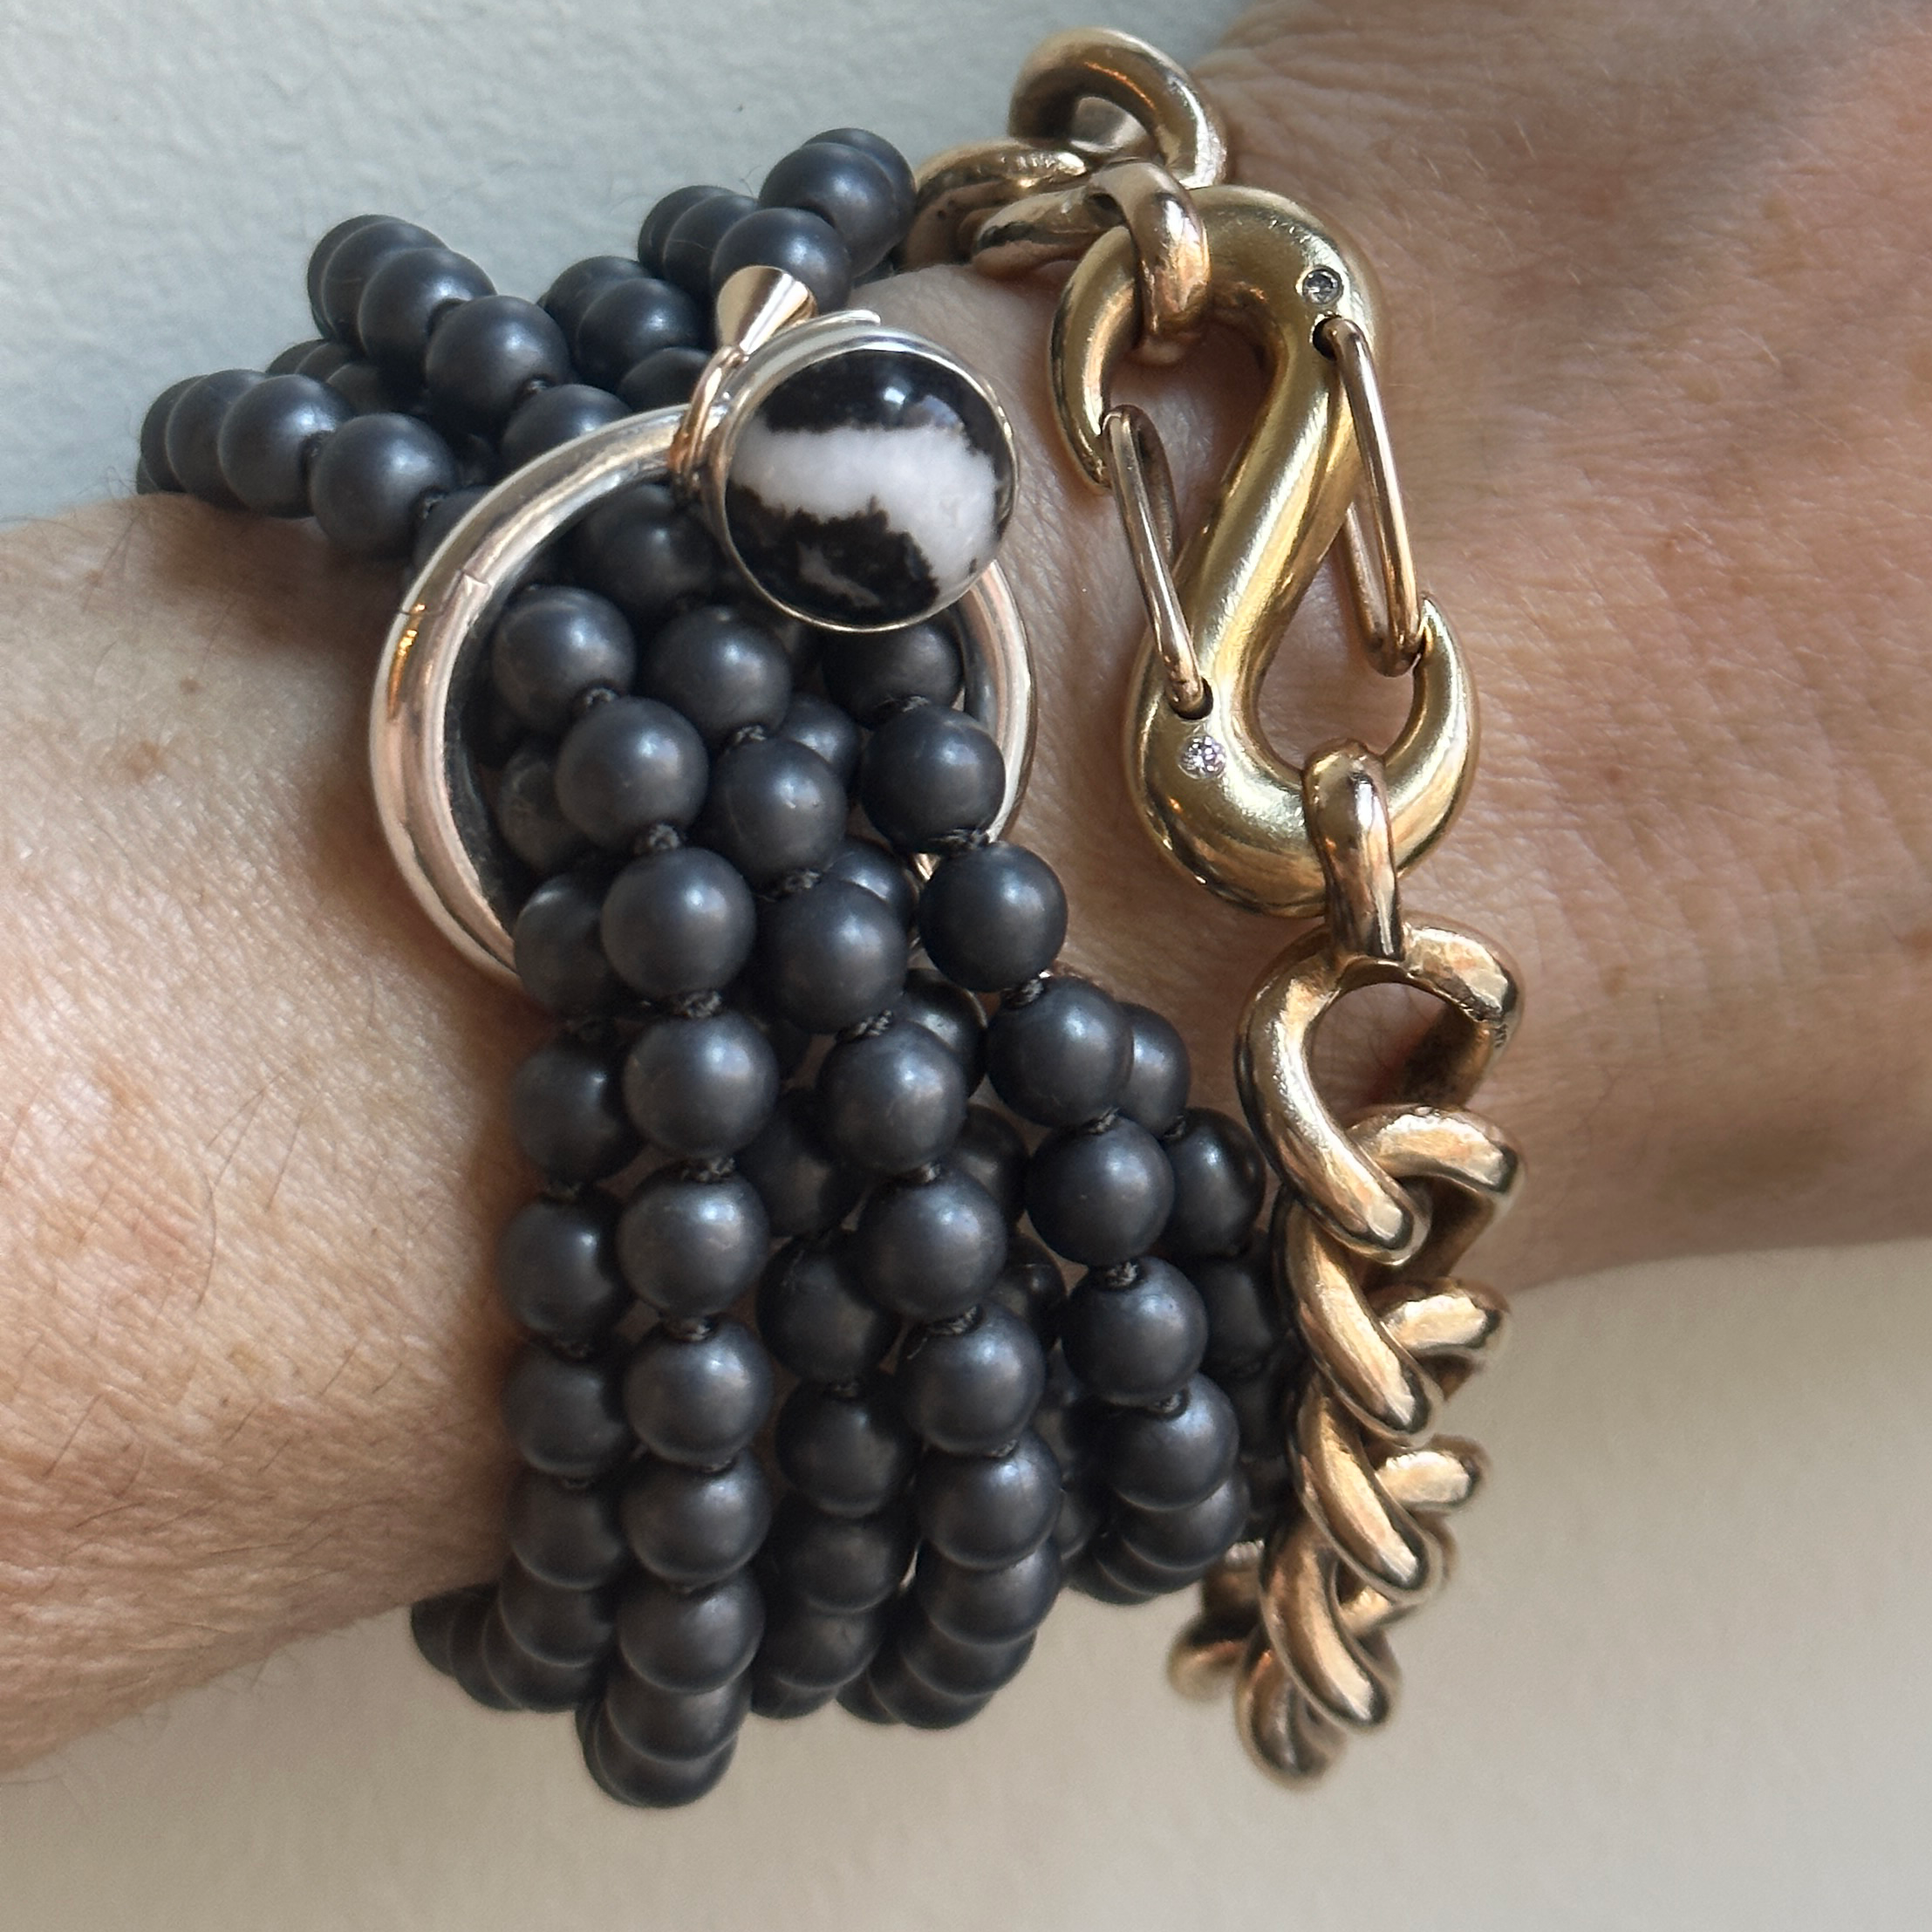 Close up of wrist wearing bracelet with stone disc charm